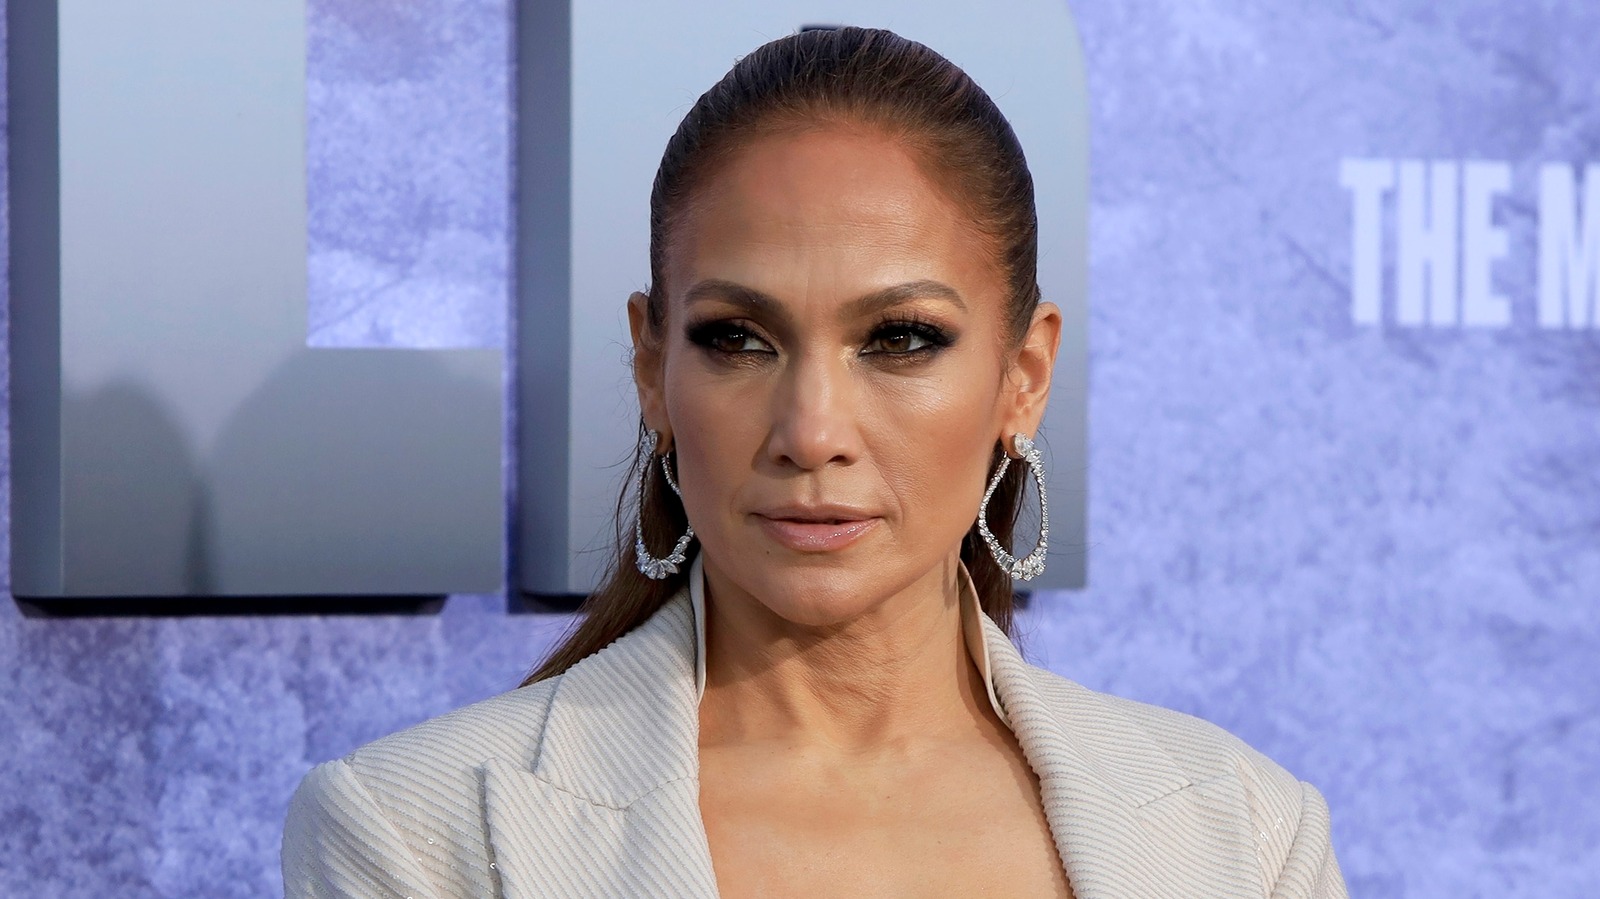 Design Experts Absolutely Adore Jennifer Lopez’s Daring Bathroom Feature